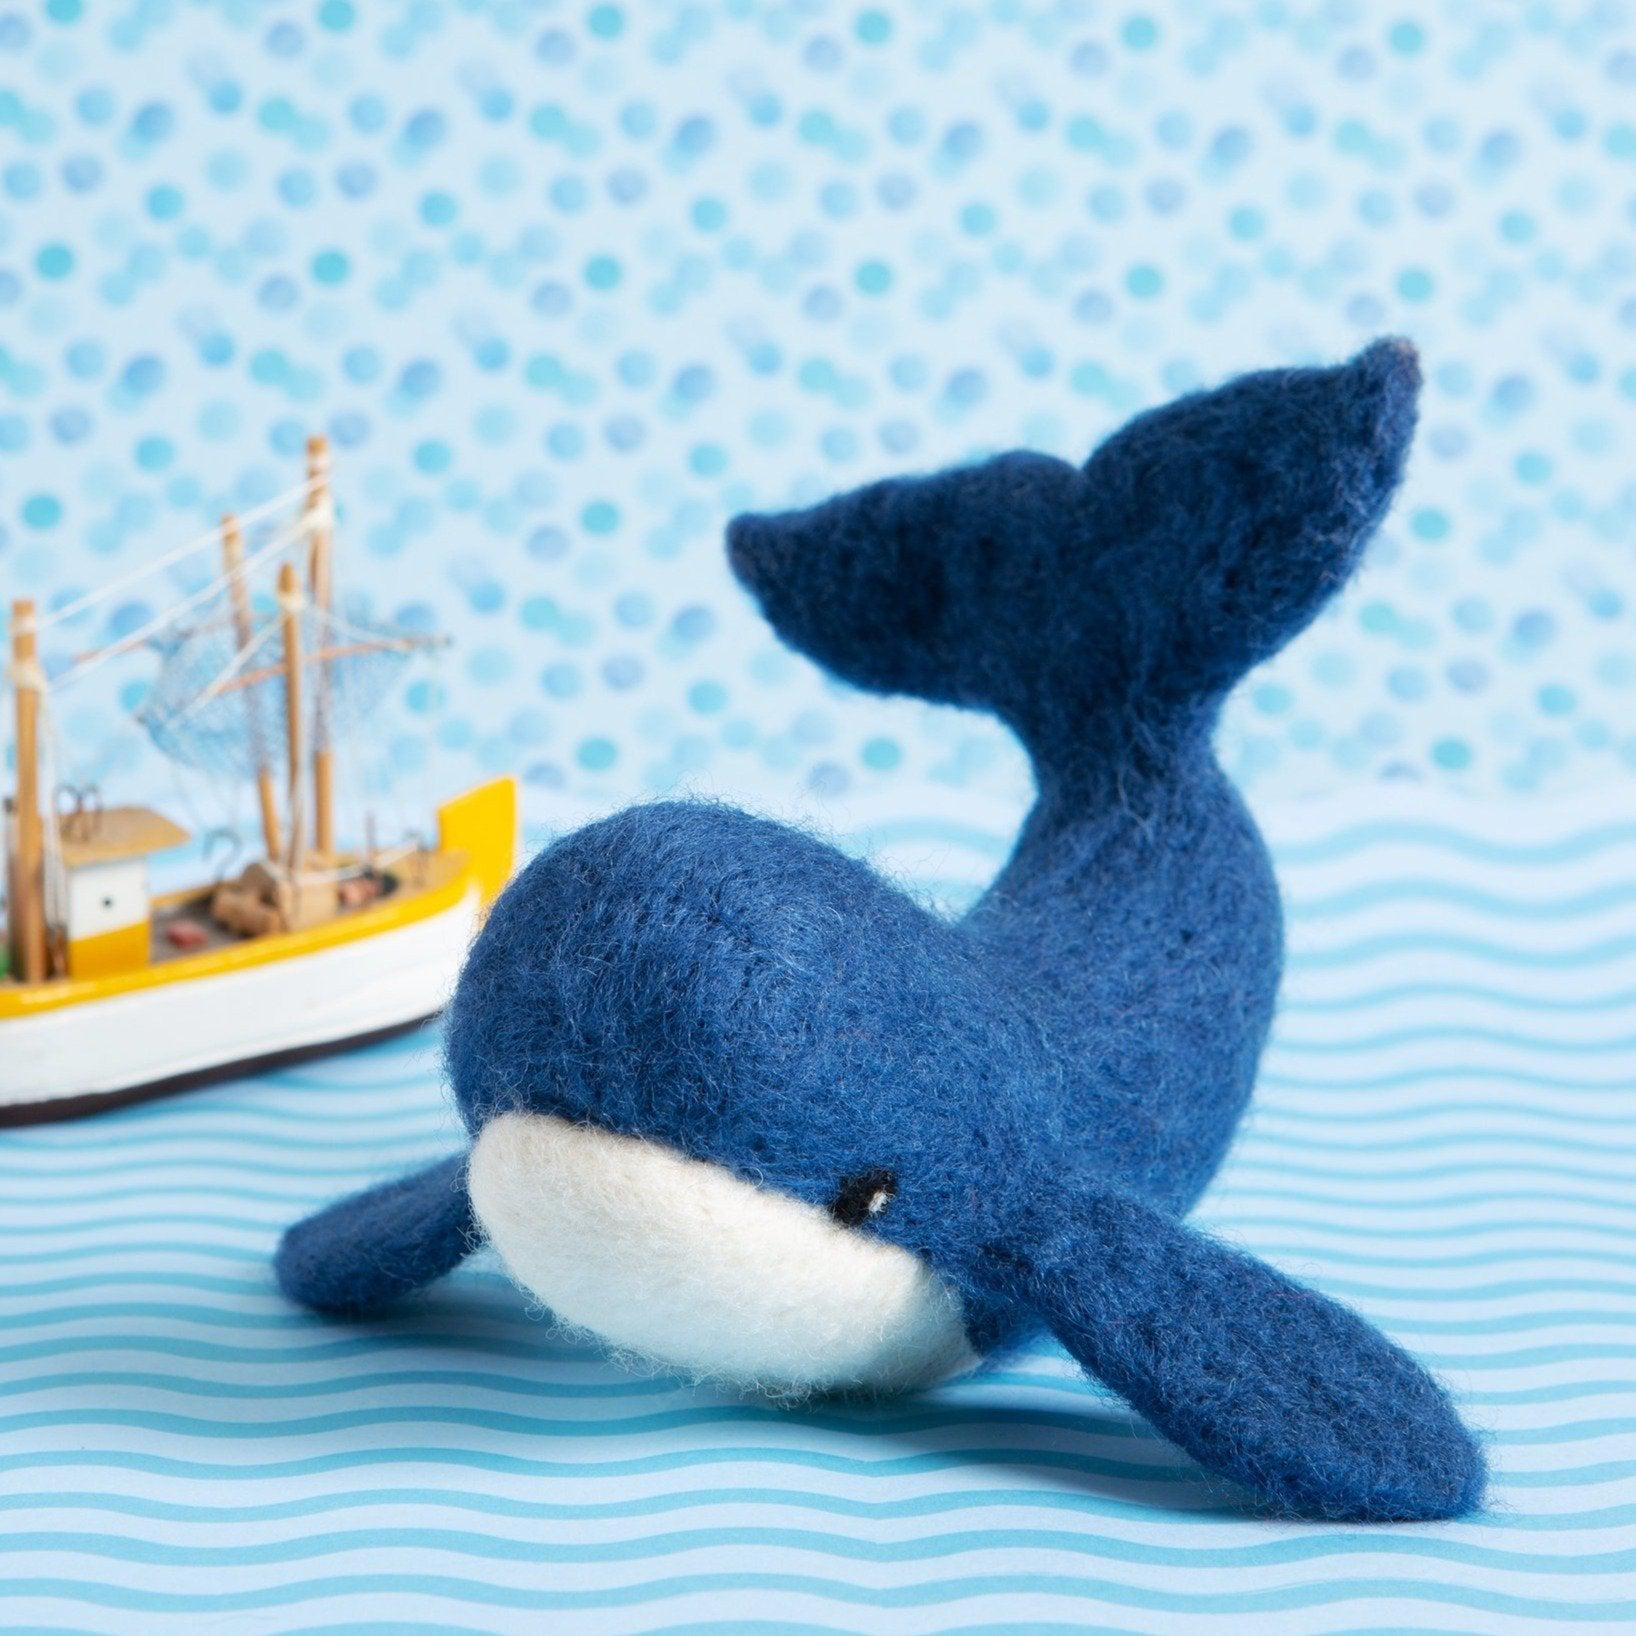 Whale Needle Felting Kit a DIY craft for beginners in Needle Felting